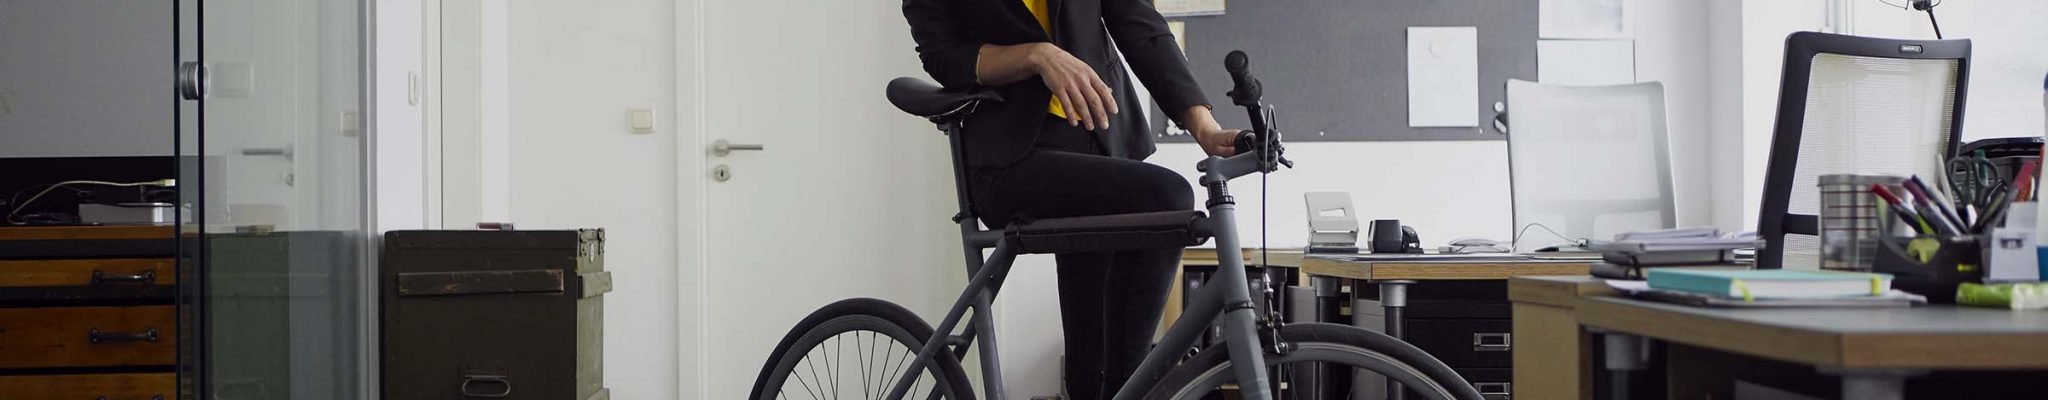 businesswoman-with-bicycle-in-her-start-up-company-JH3WZ3K.jpg